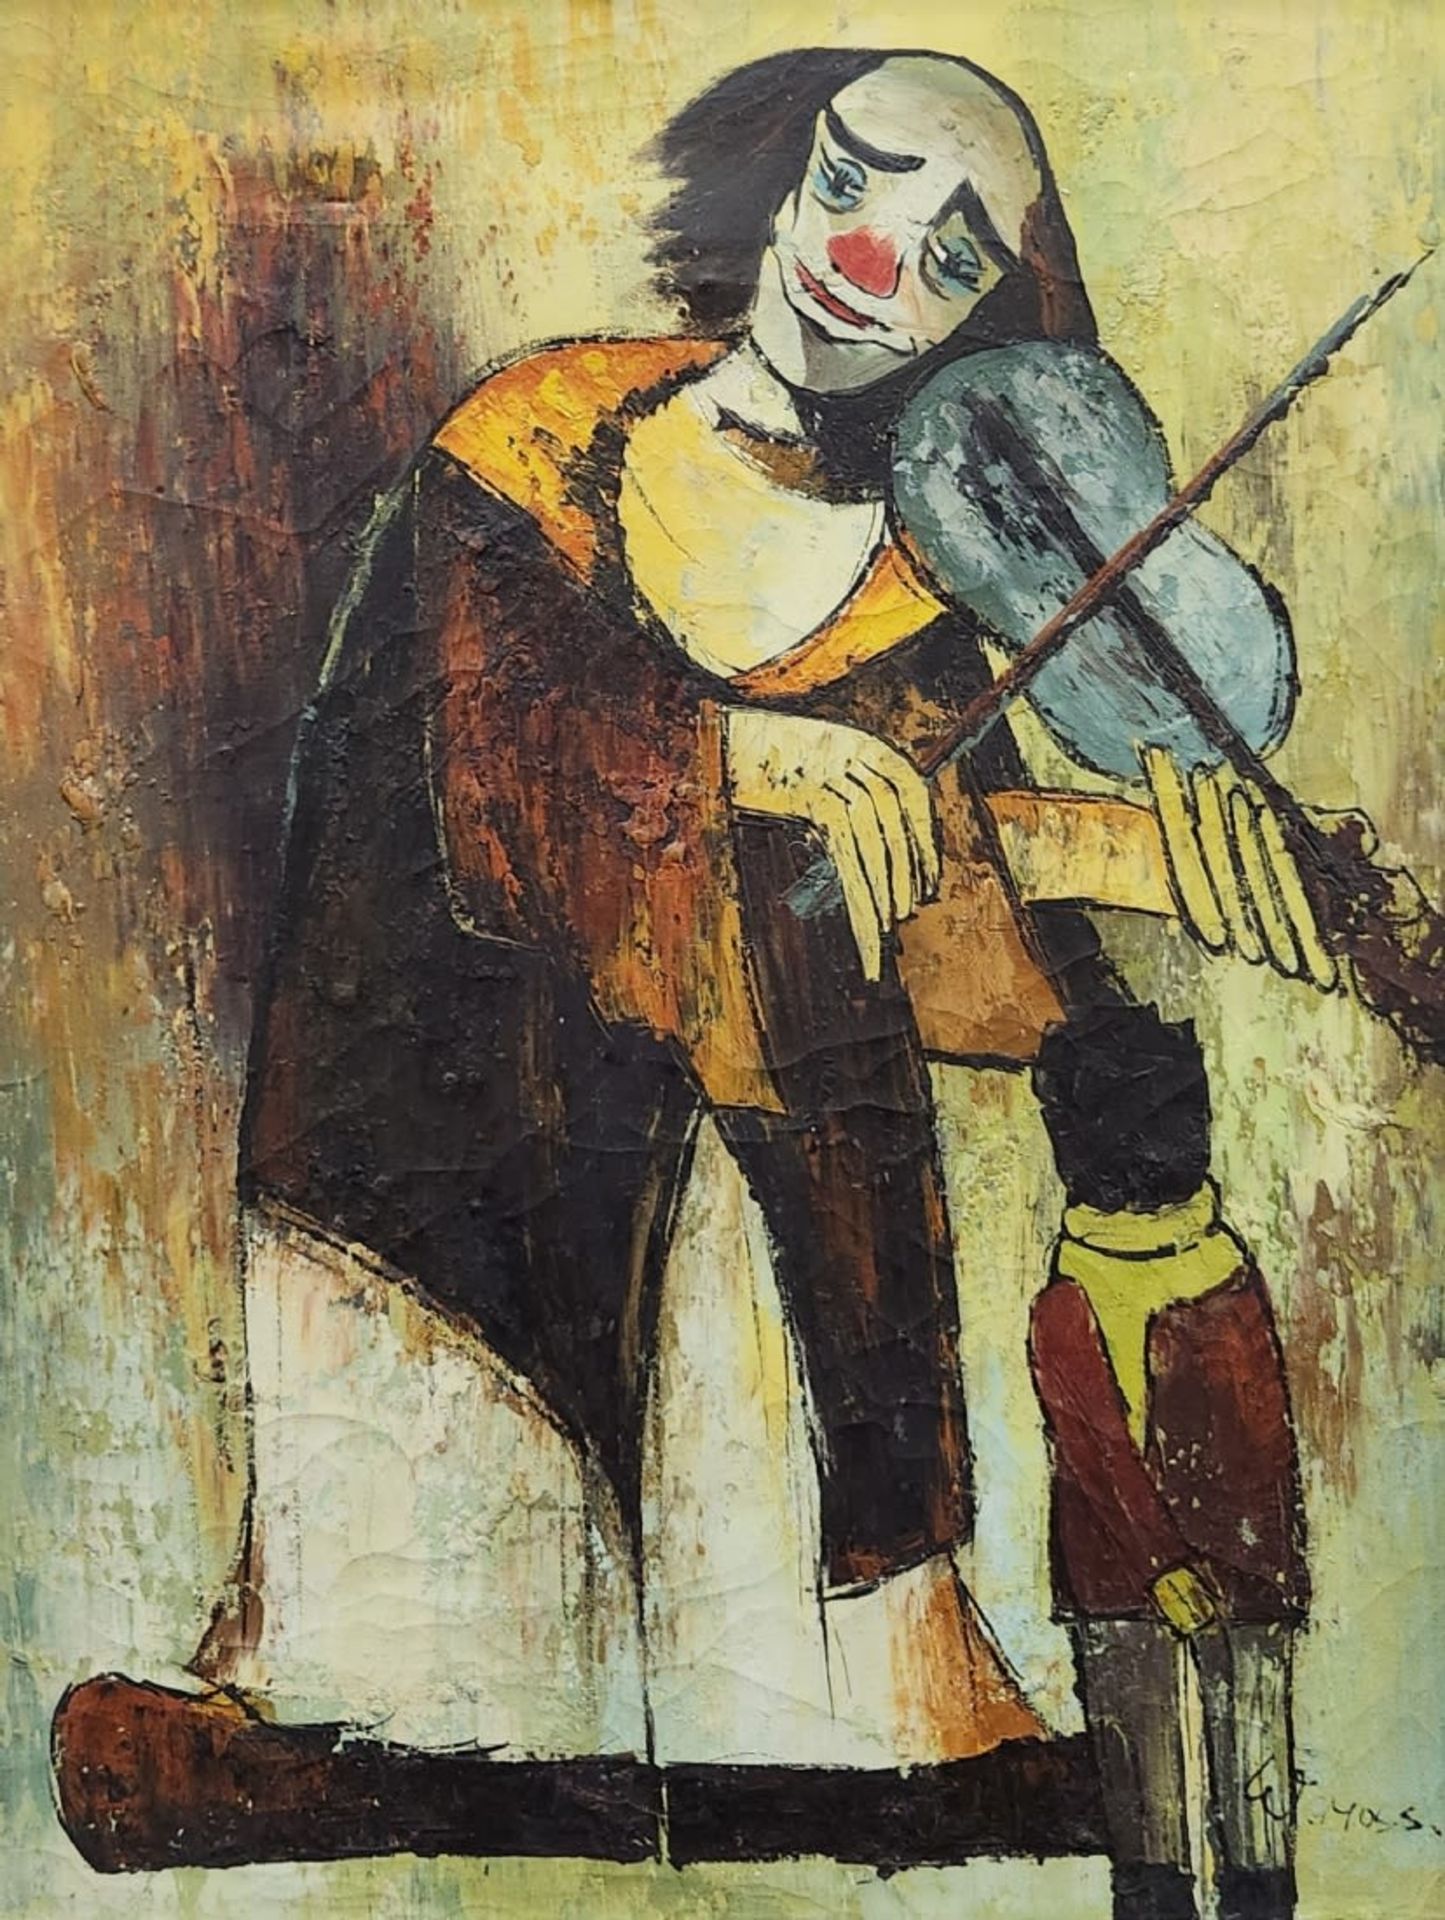 'Clown and blue violin' - painting, oil on canvas, signed. Dimensions: 61X47 cm. Frame dimensions: